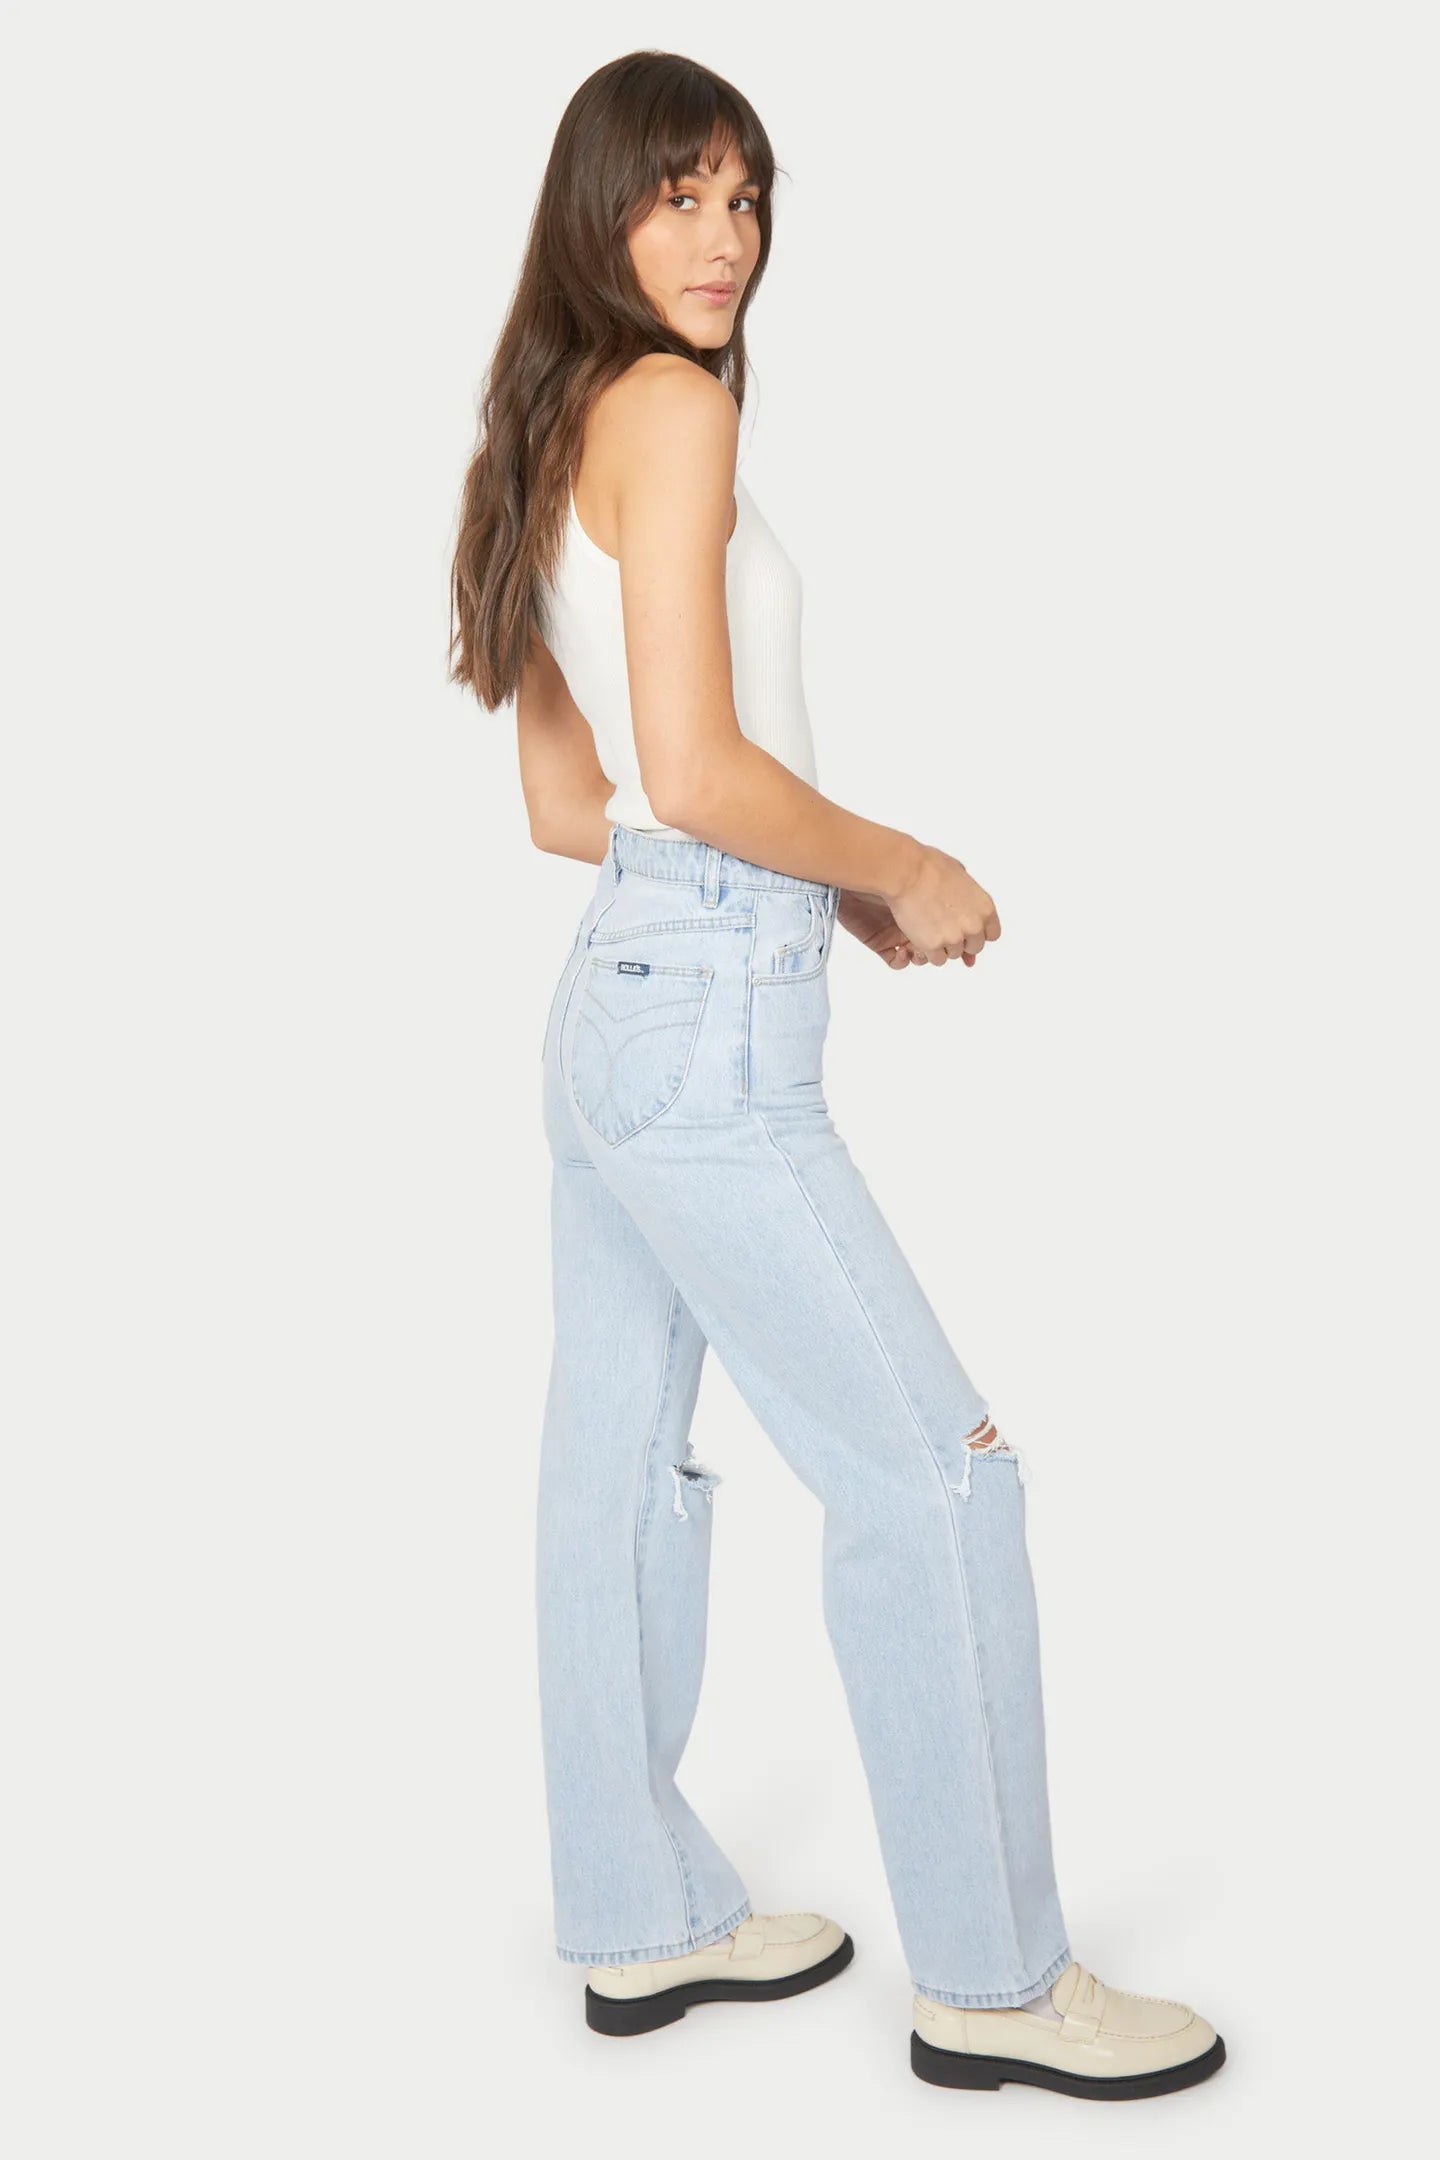 ROLLAS // Heidi Jeans HOLIDAY BLUE